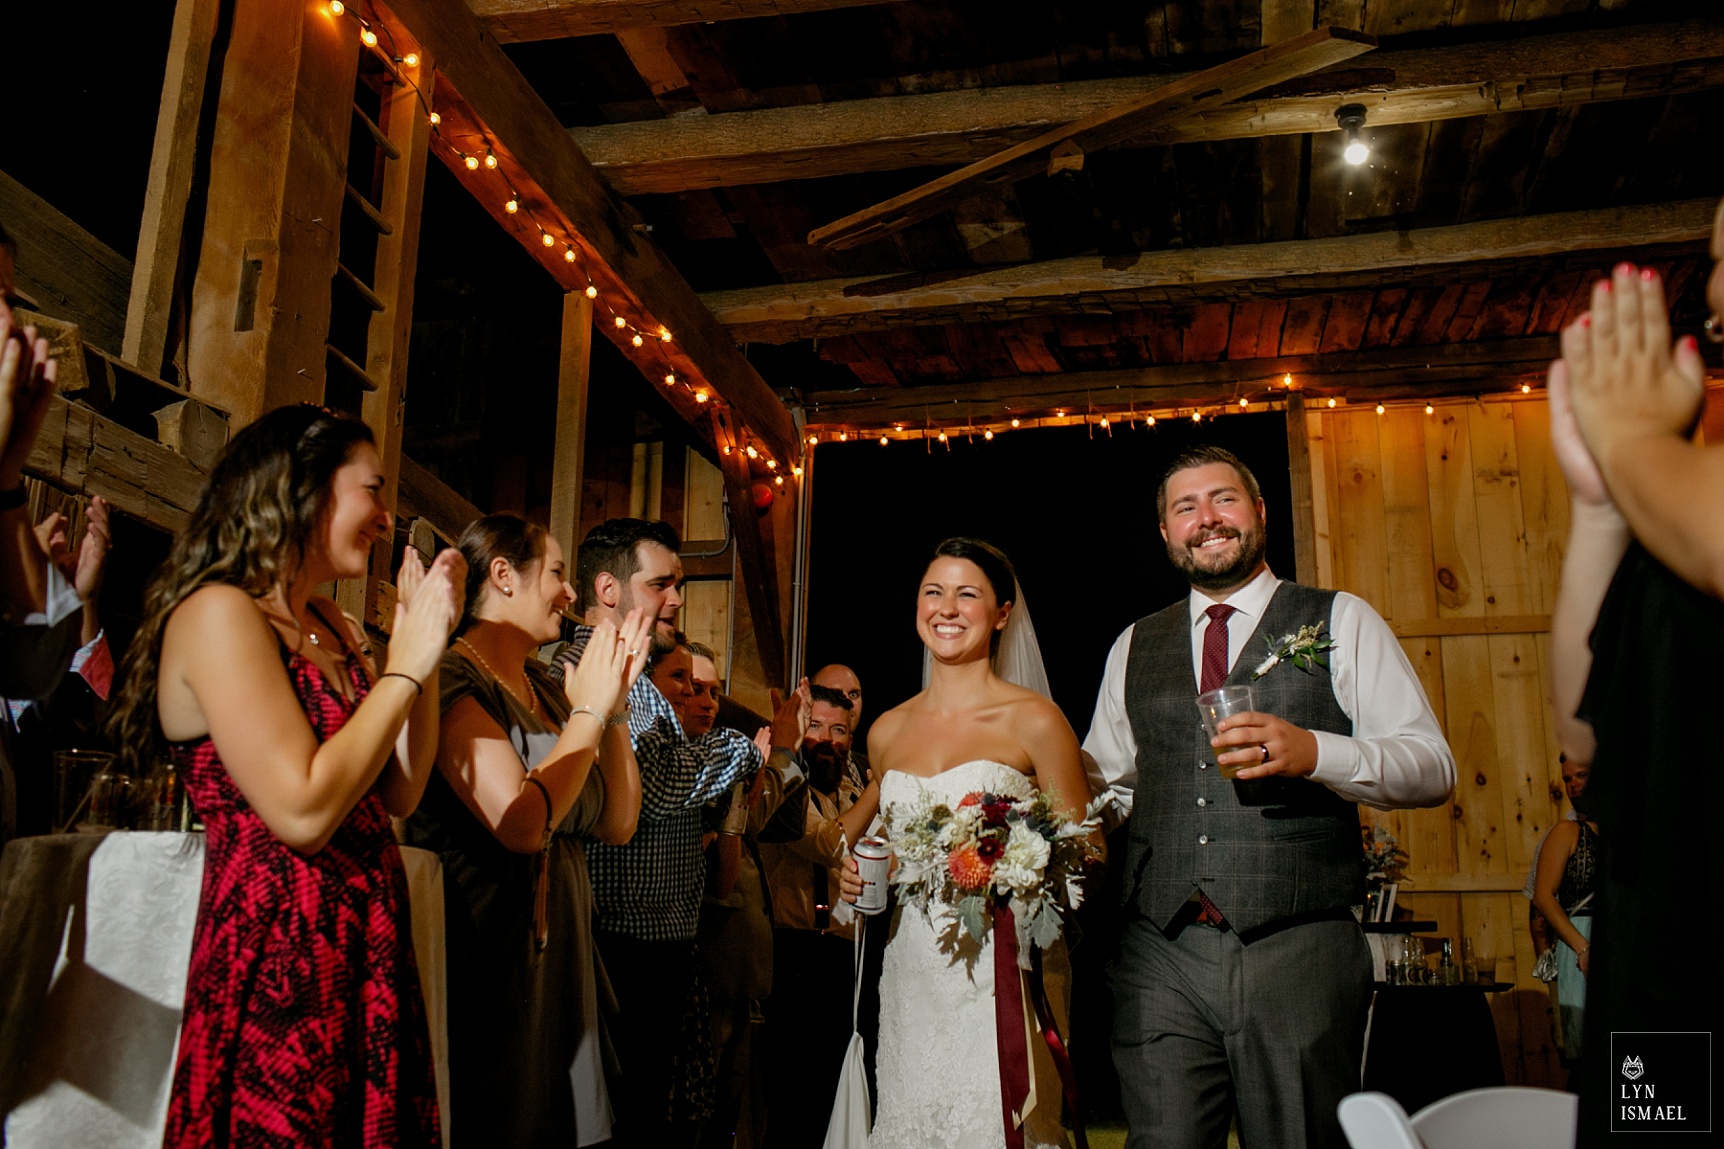 Bride and groom is introduced as husband and wife at their wedding reception at the Steckle Heritage Farm's barn